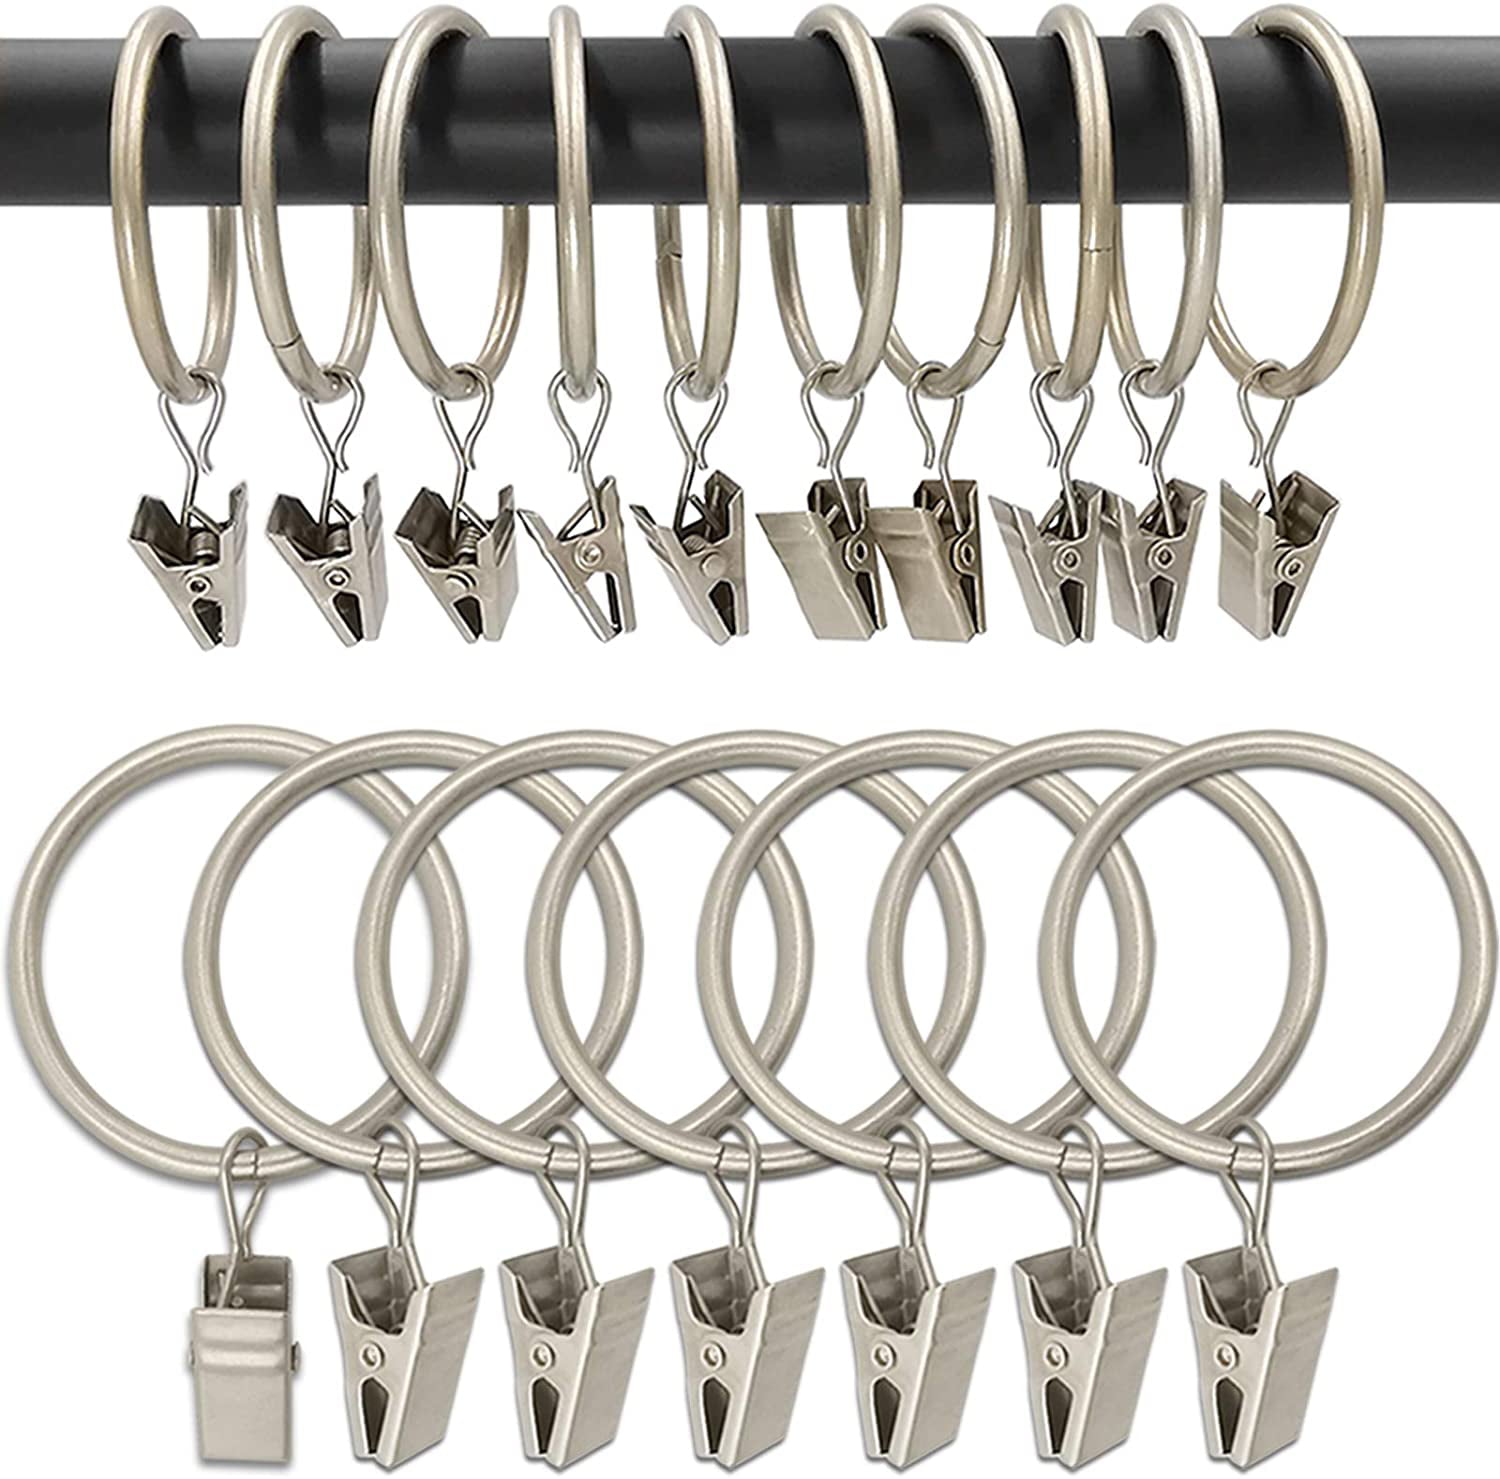 10pcs 1.5" Stainless Steel Curtain Rod Hook Clips Window Shower Curtain Rings 